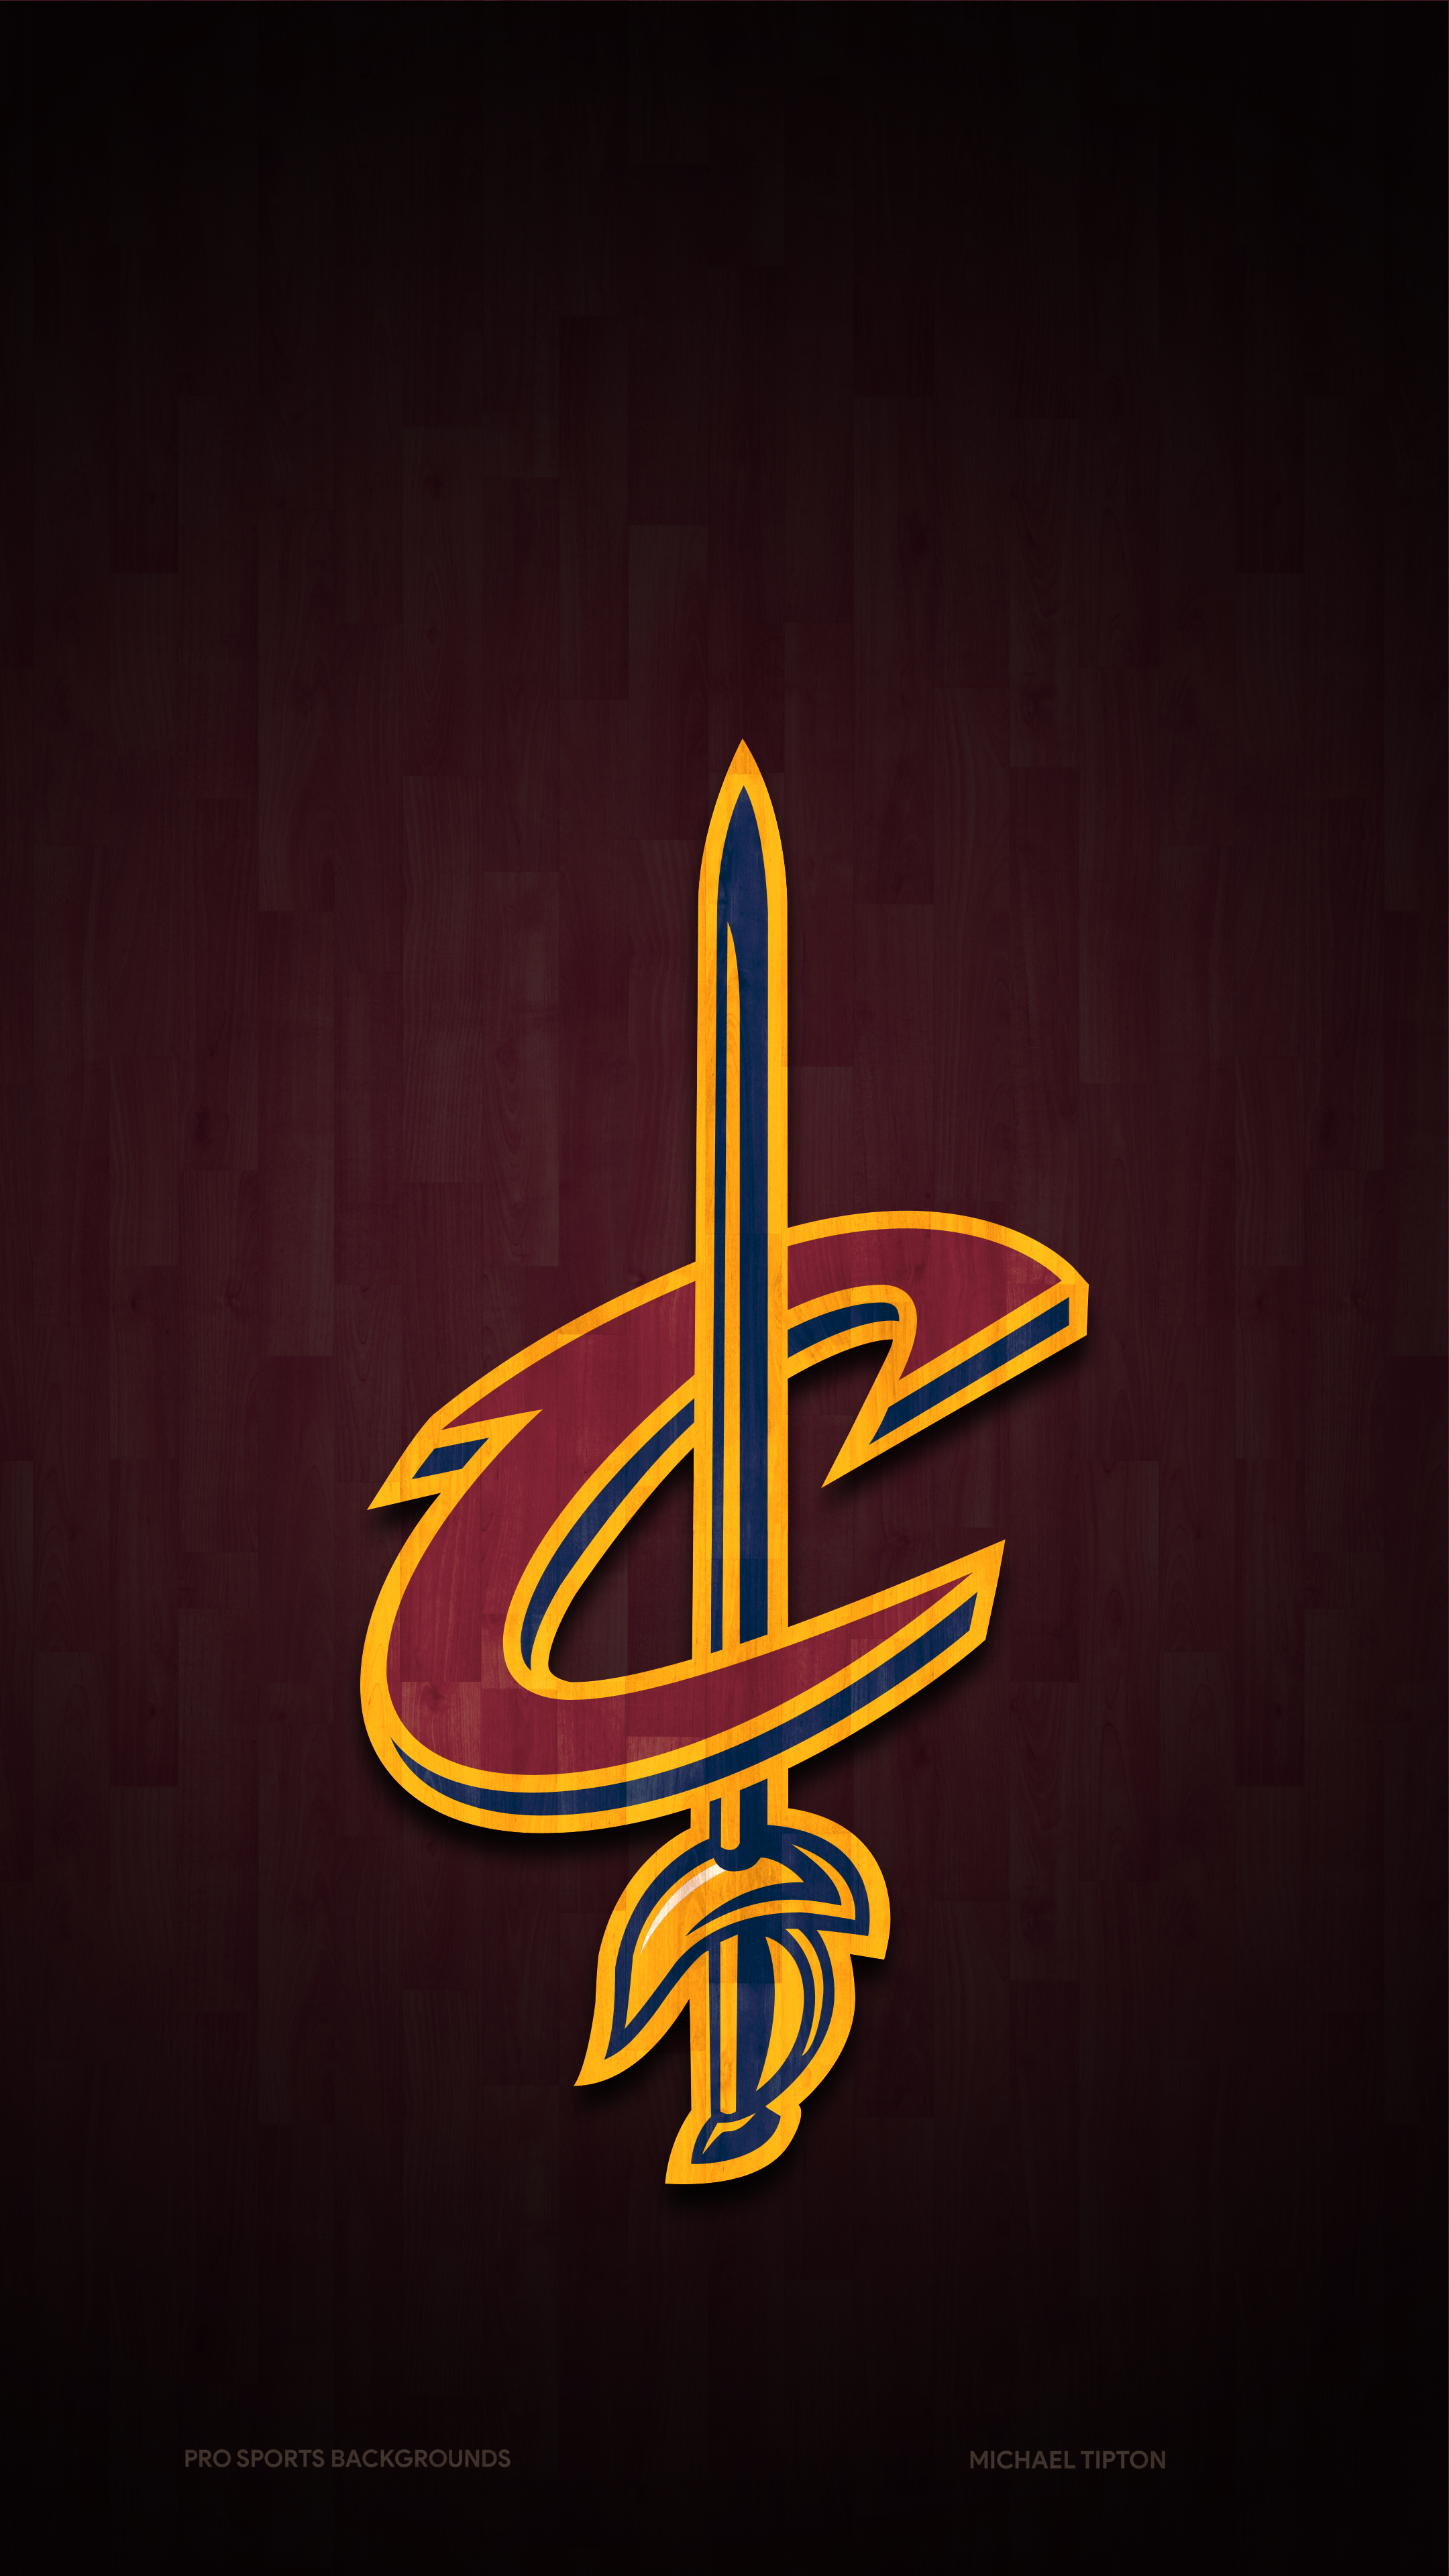 2022 Cleveland Cavaliers Wallpaper